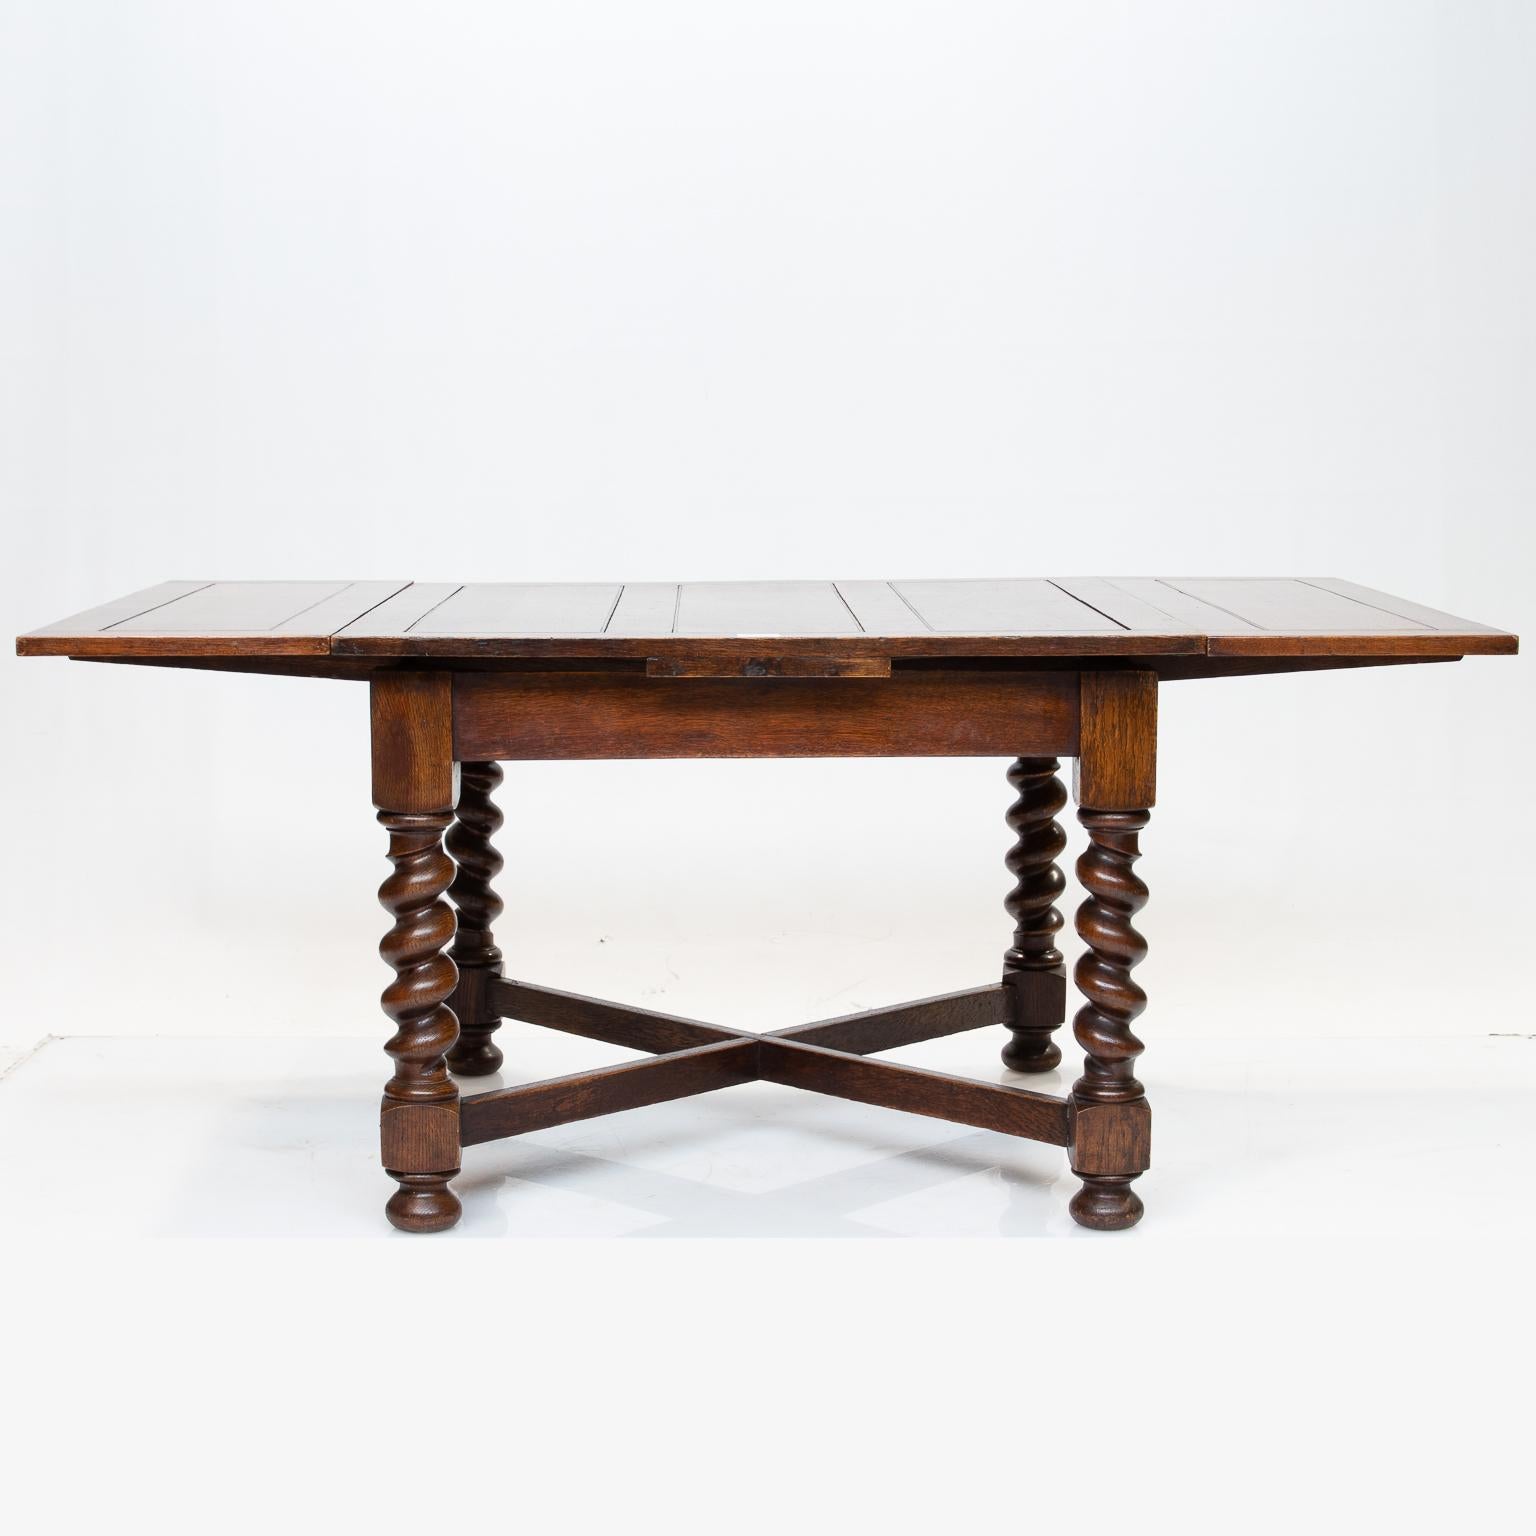 English pub table with draw ends and panel style top. This pub table is made from English oak. The top and draw ends fit very well when fully extended. The legs are in a twist and bun feet. An x-stretcher connects the four legs which add strength.